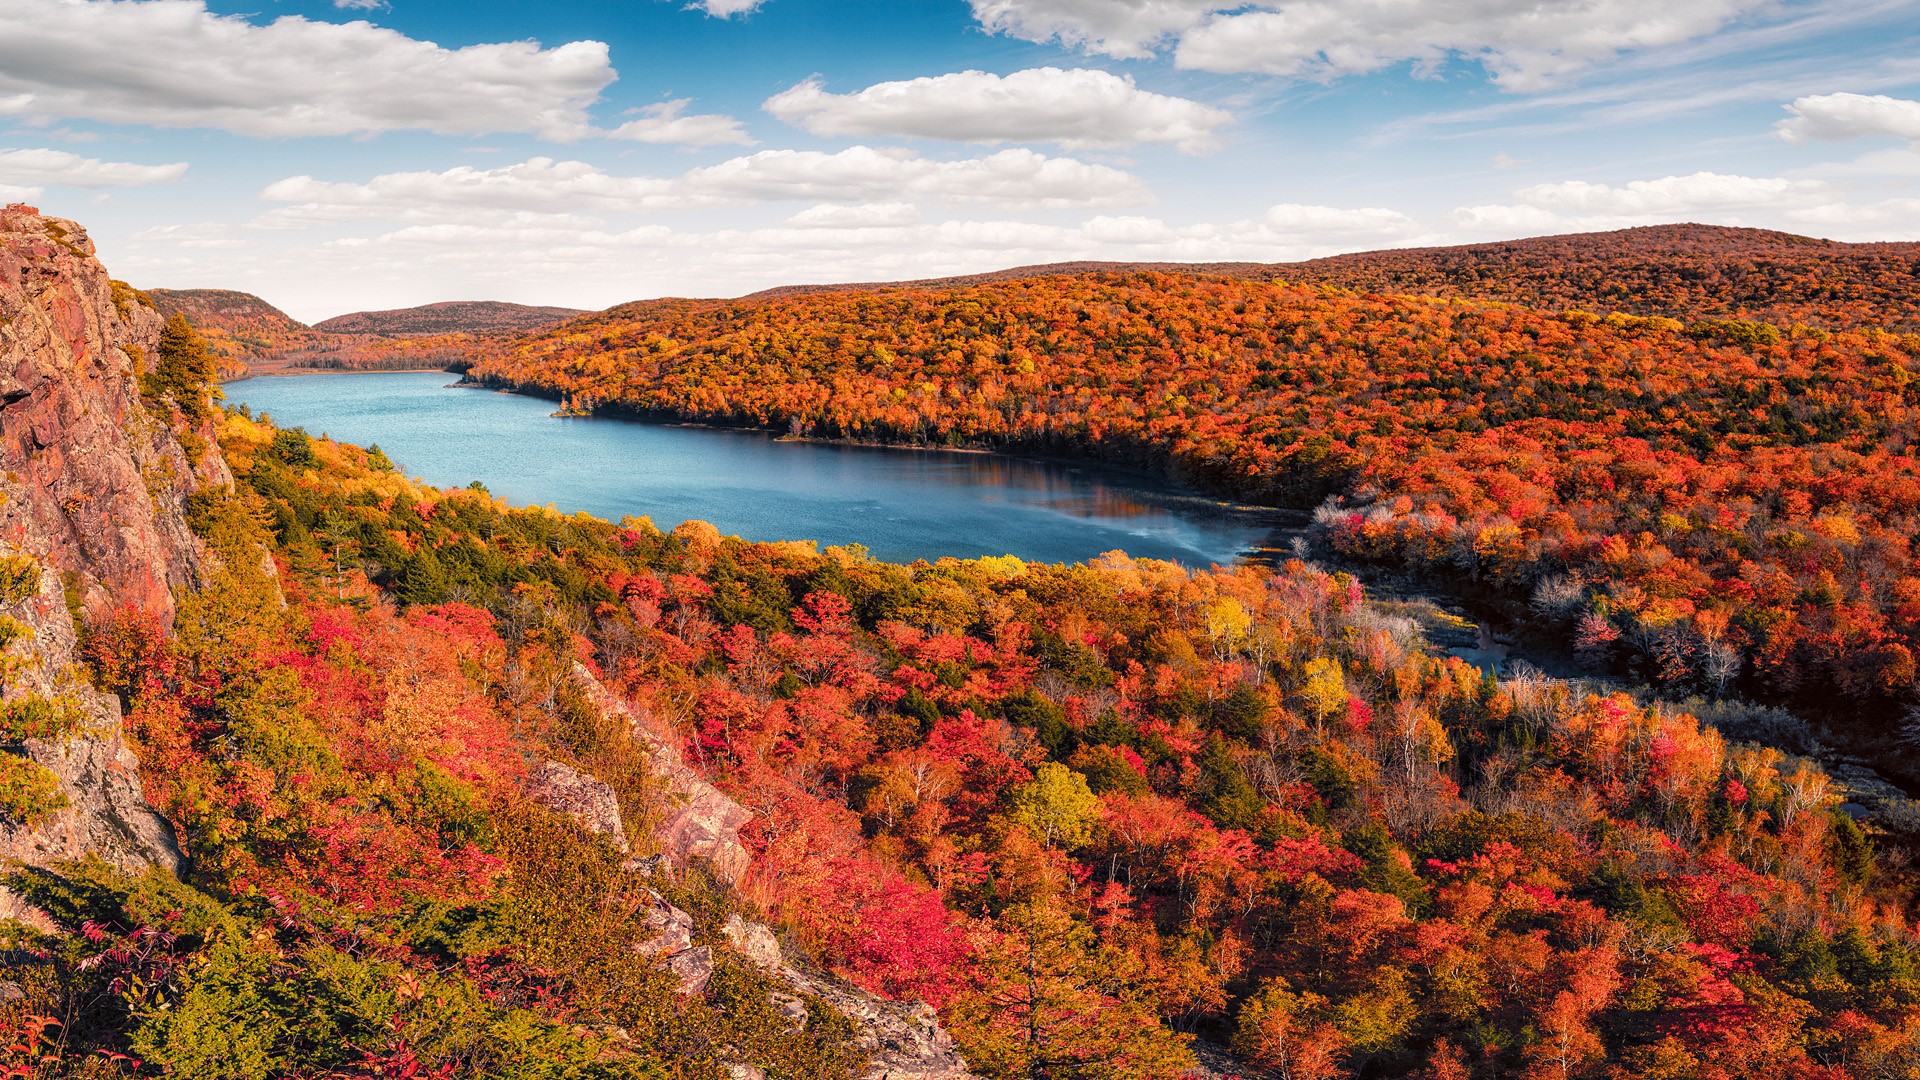 Lake of the Clouds, Porcupine Mountains in Fall Color, Upper Michigan  Peninsula, USA | Windows 10 Spotlight Images